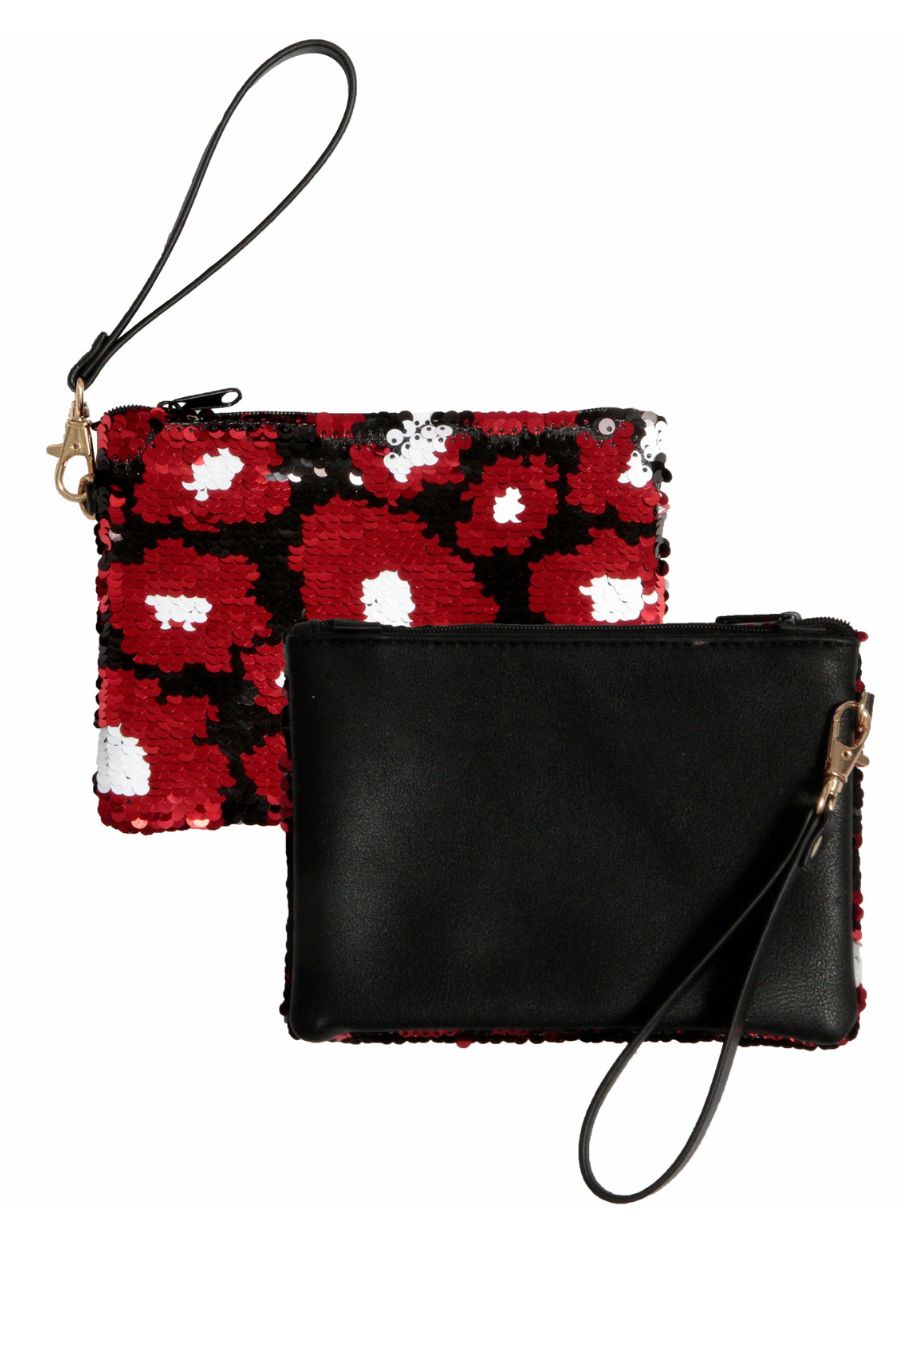 TOO CHIC REVERSIBLE SEQUIN WRISTLET IN BLACK AND RED